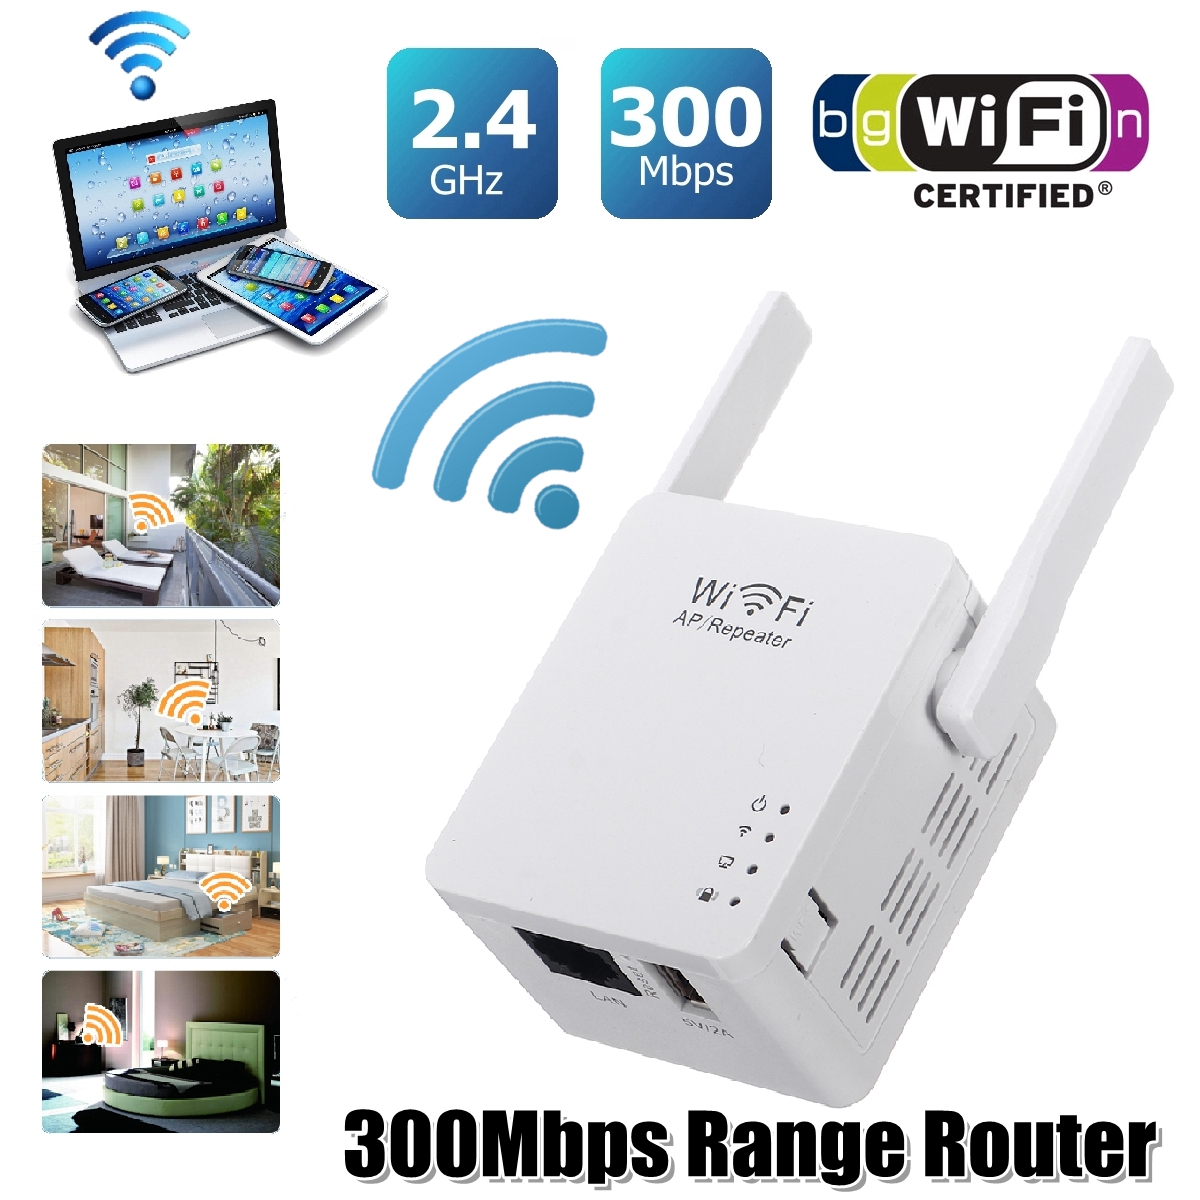 300Mbps-80211n-Wireless-Wifi-Extender-Repeater-24G-AP-Router-Dual-Antenna-Signal-Booster-Extender-Am-1529338-1